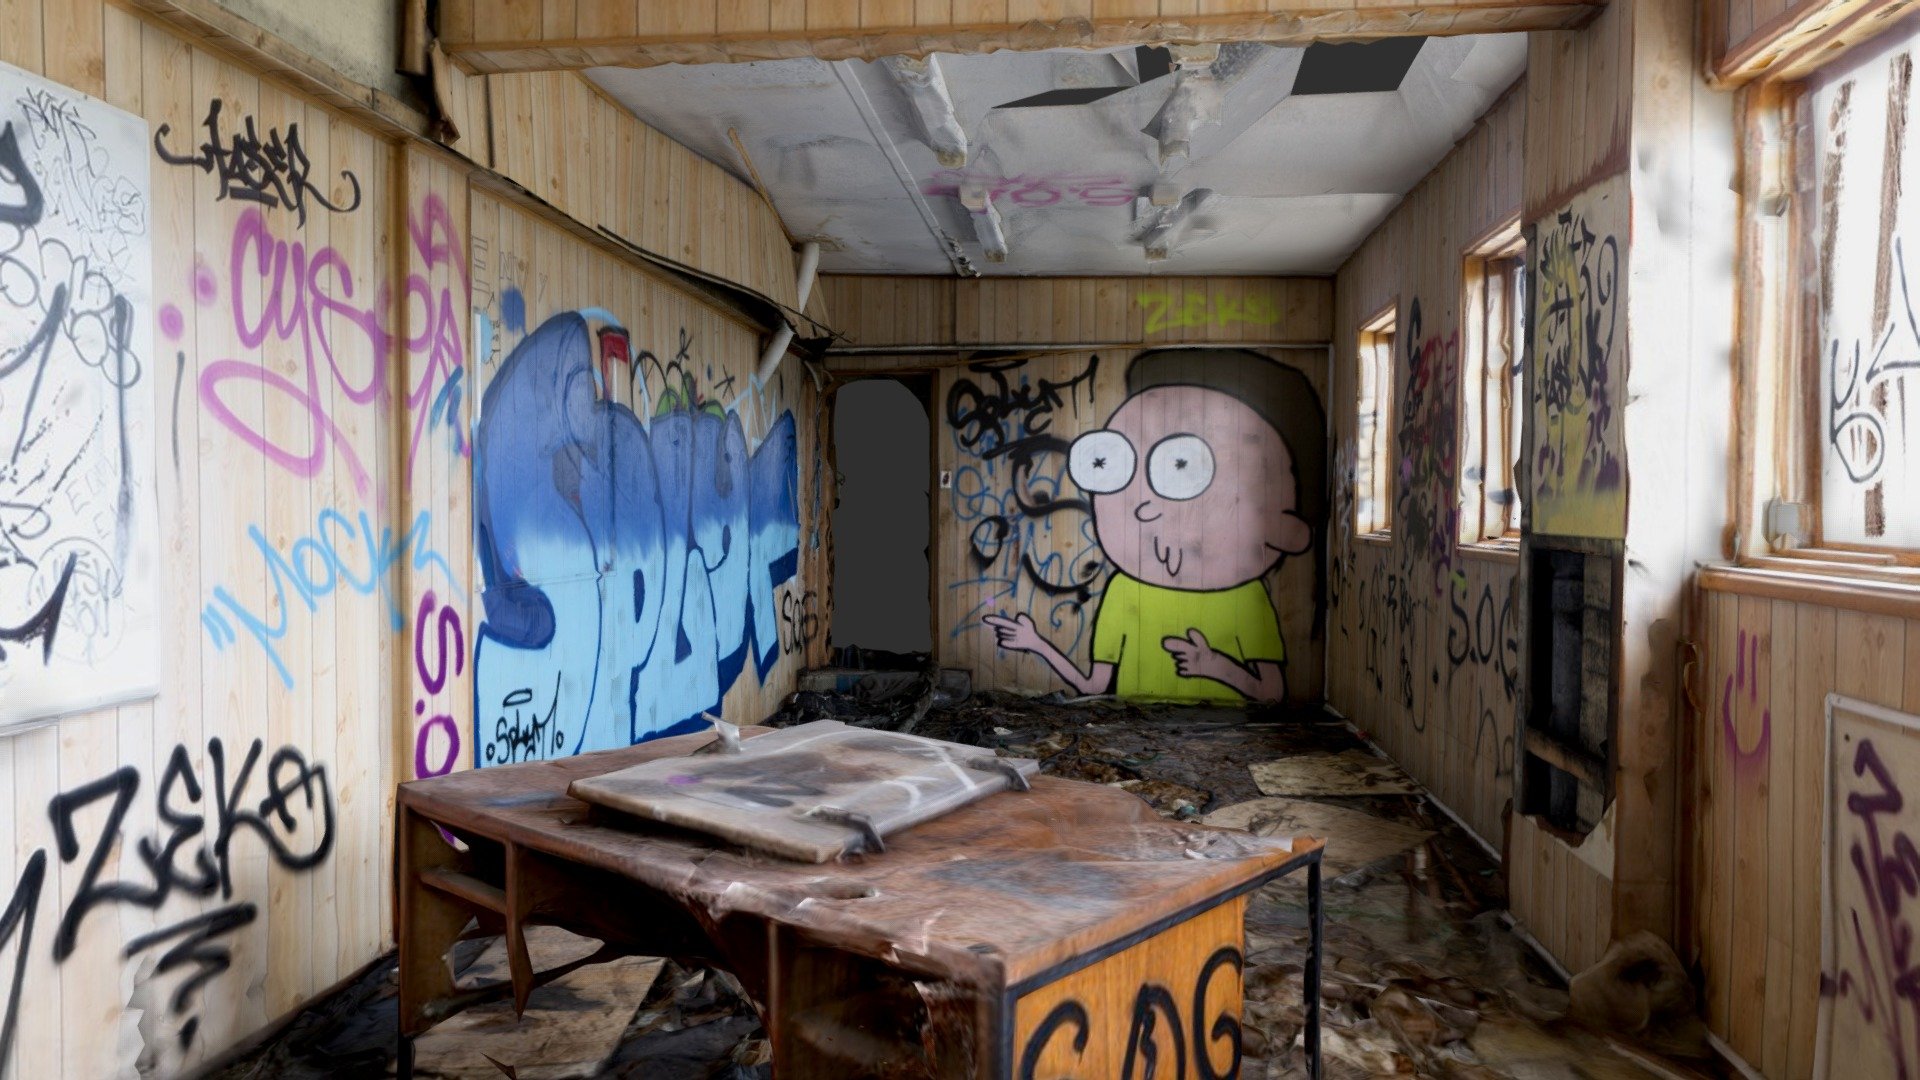 Found in an abandoned factory in Melbourne Australia. The graffiti was all over the facility. It was a dank smelly room and I plan to visit and cover more of the factory 3d model